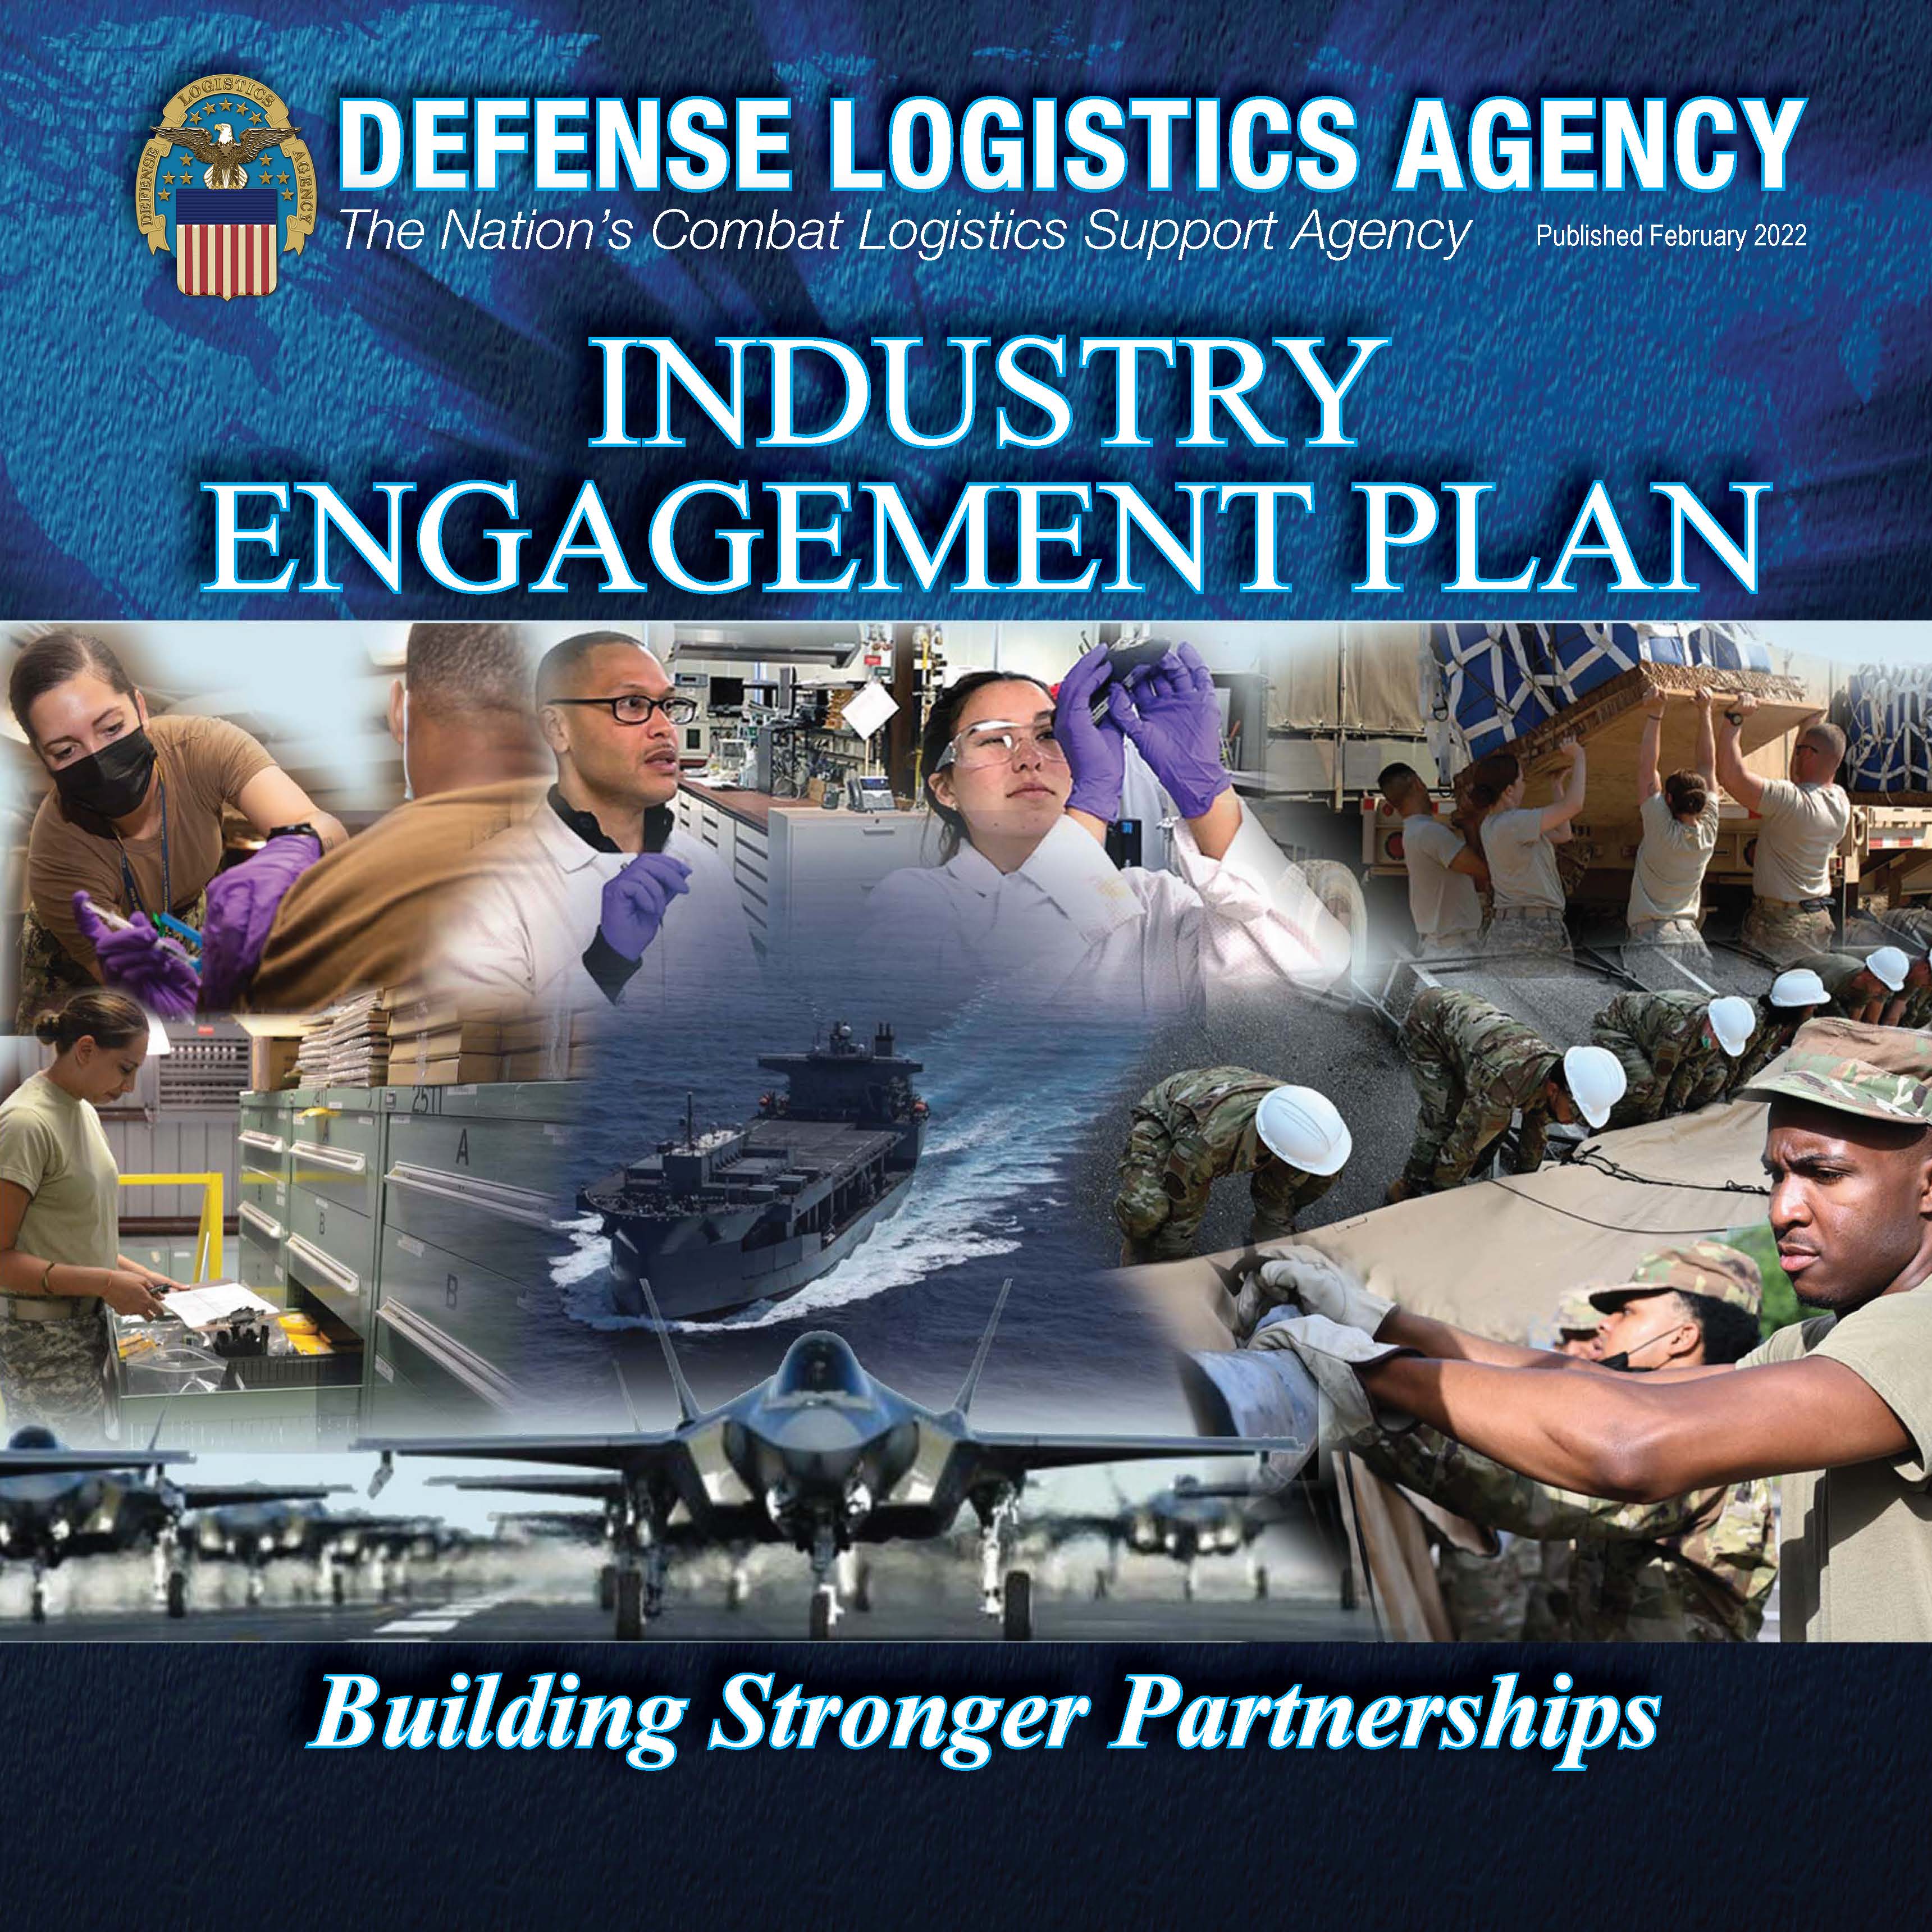 Cover for the 2022 Industry Engagement Plan